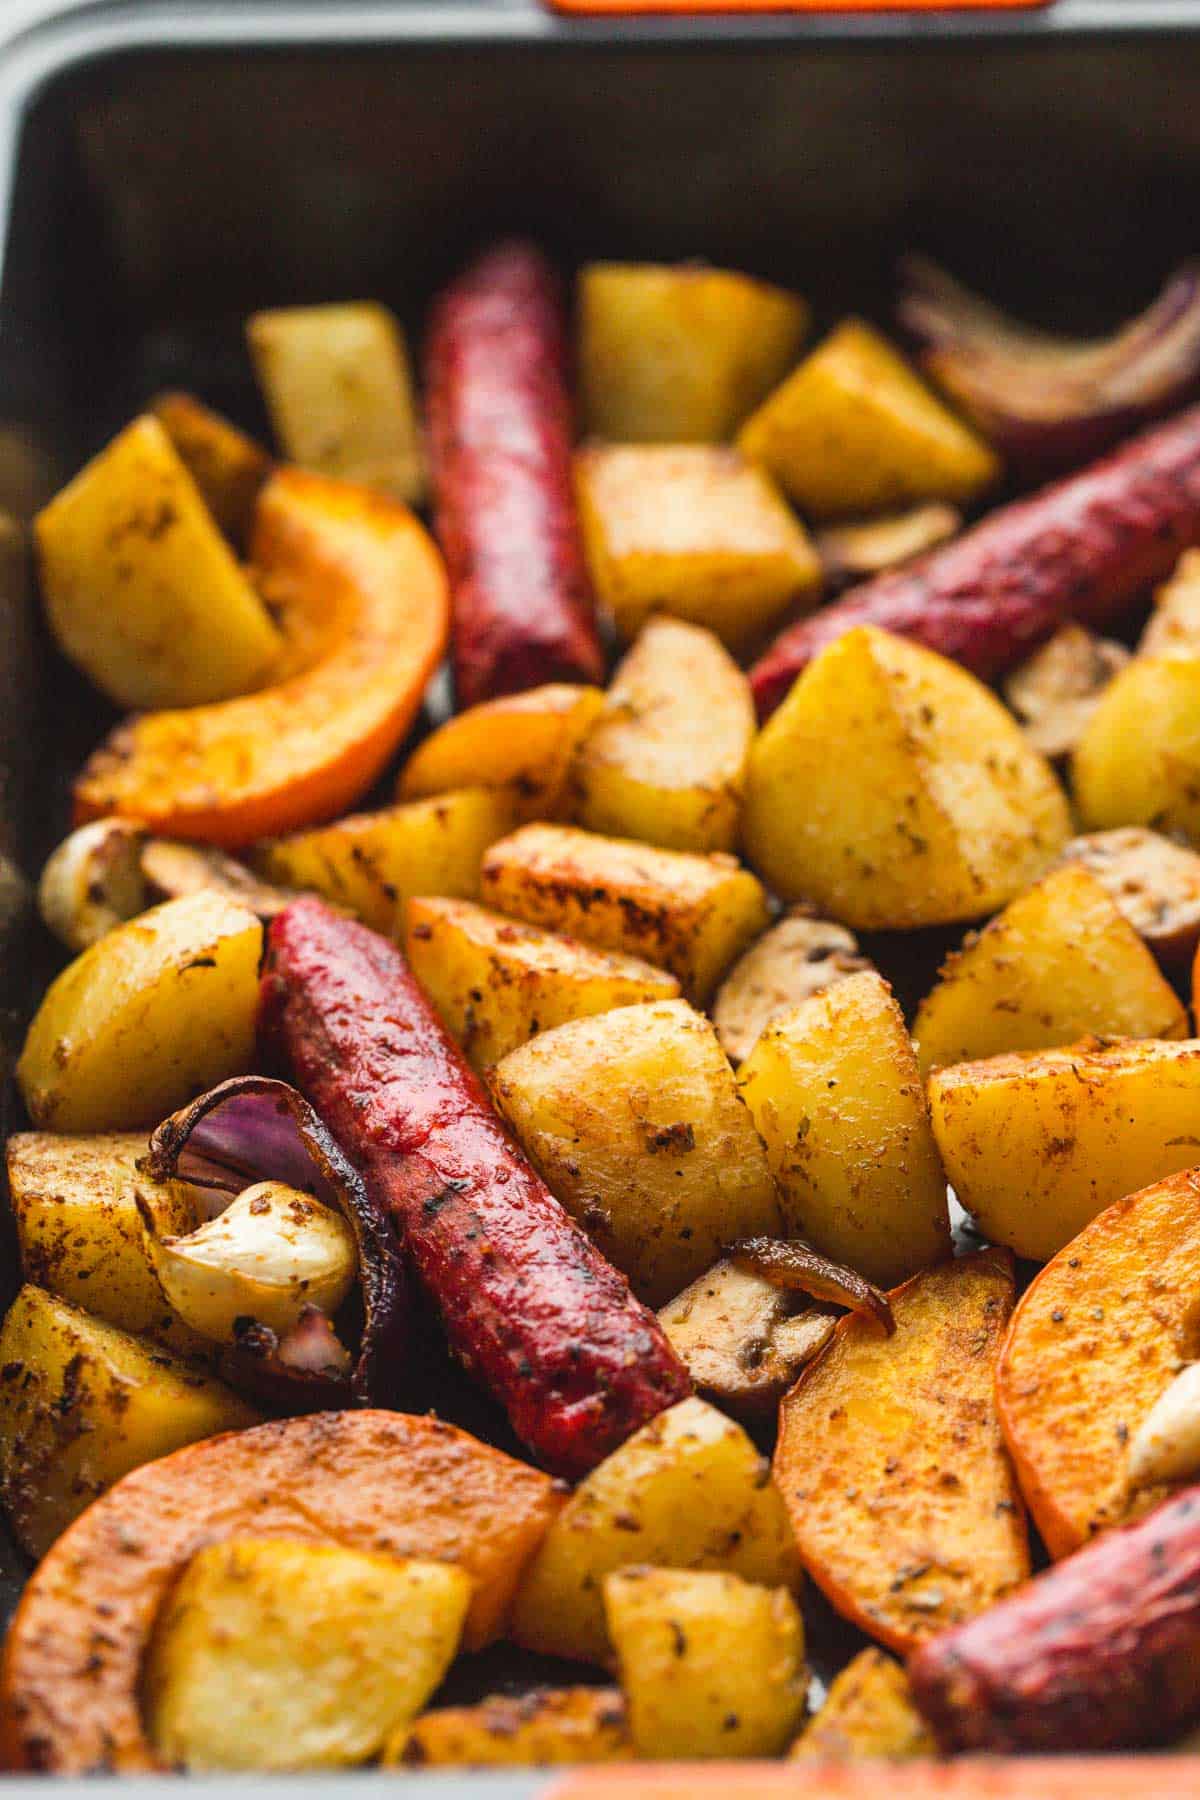 A close up shot of a cooked sausage and potatoes